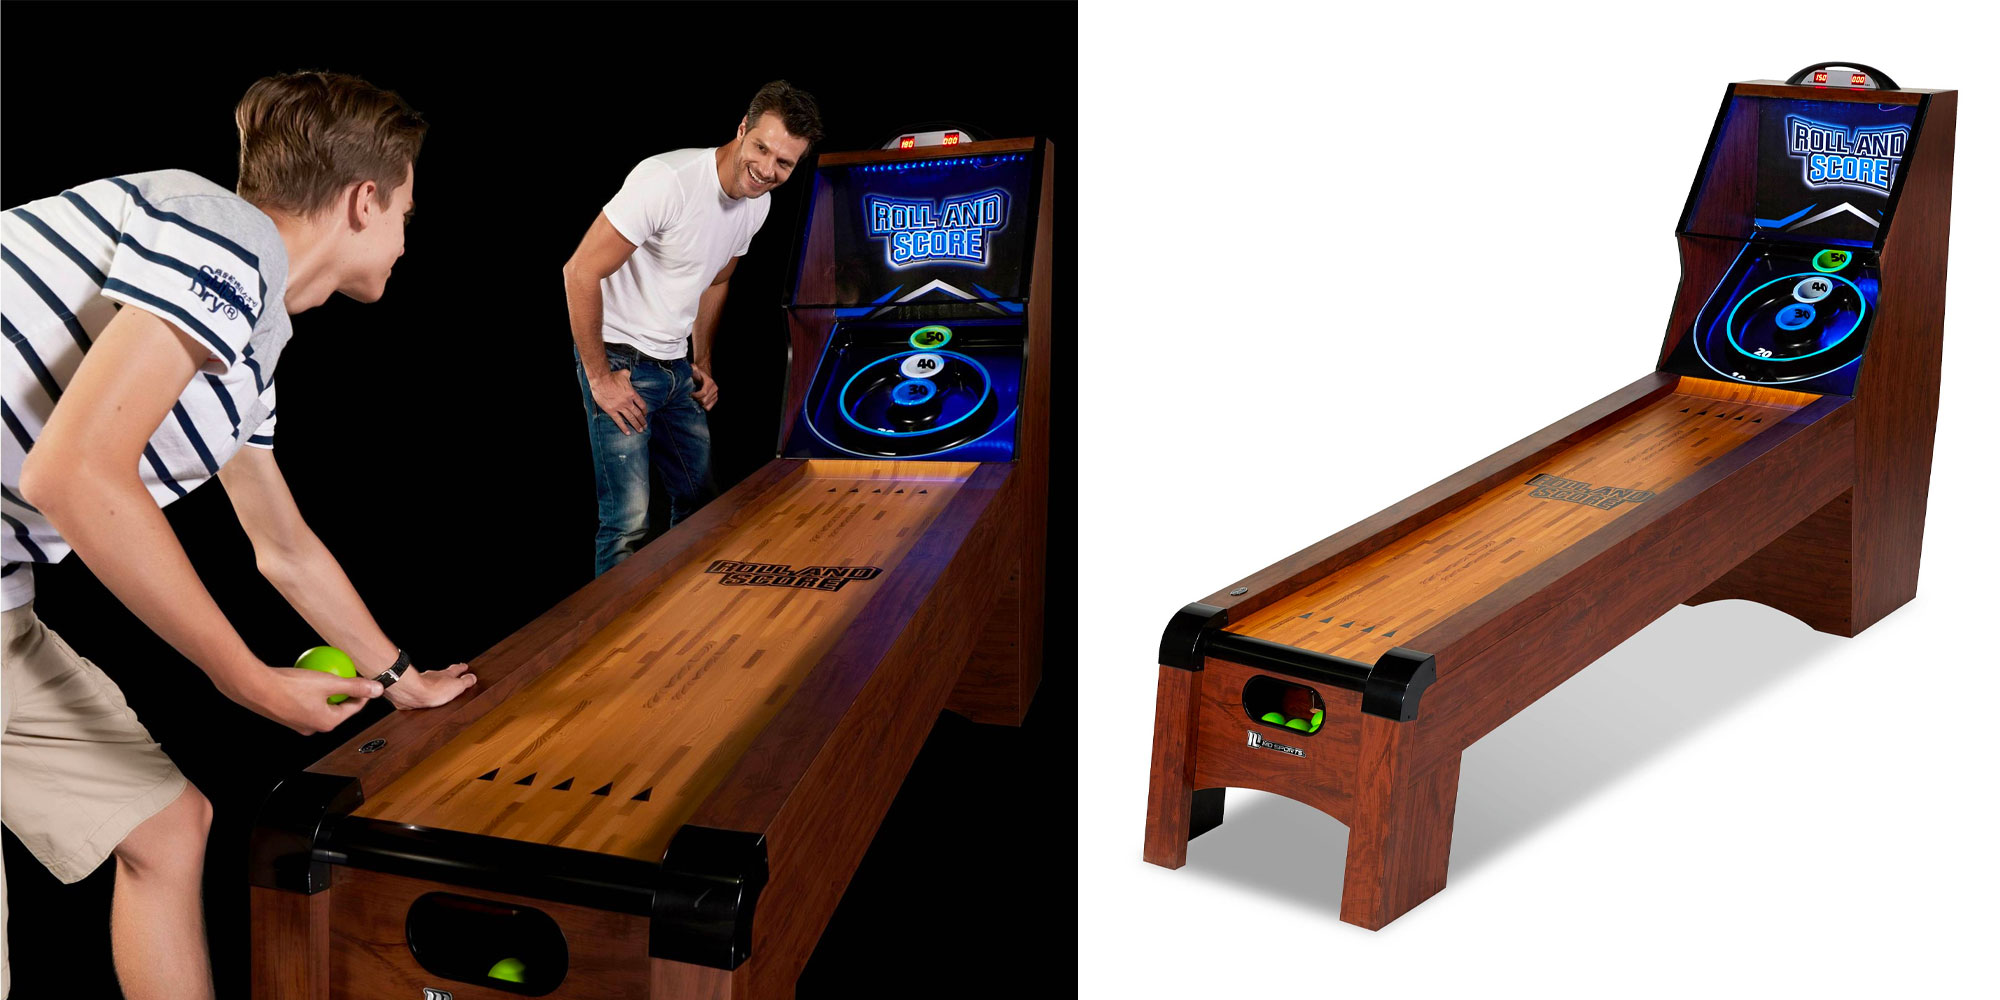 Skee Ball Free Game Switch *Convert Your Game To Free Play With This Switch*